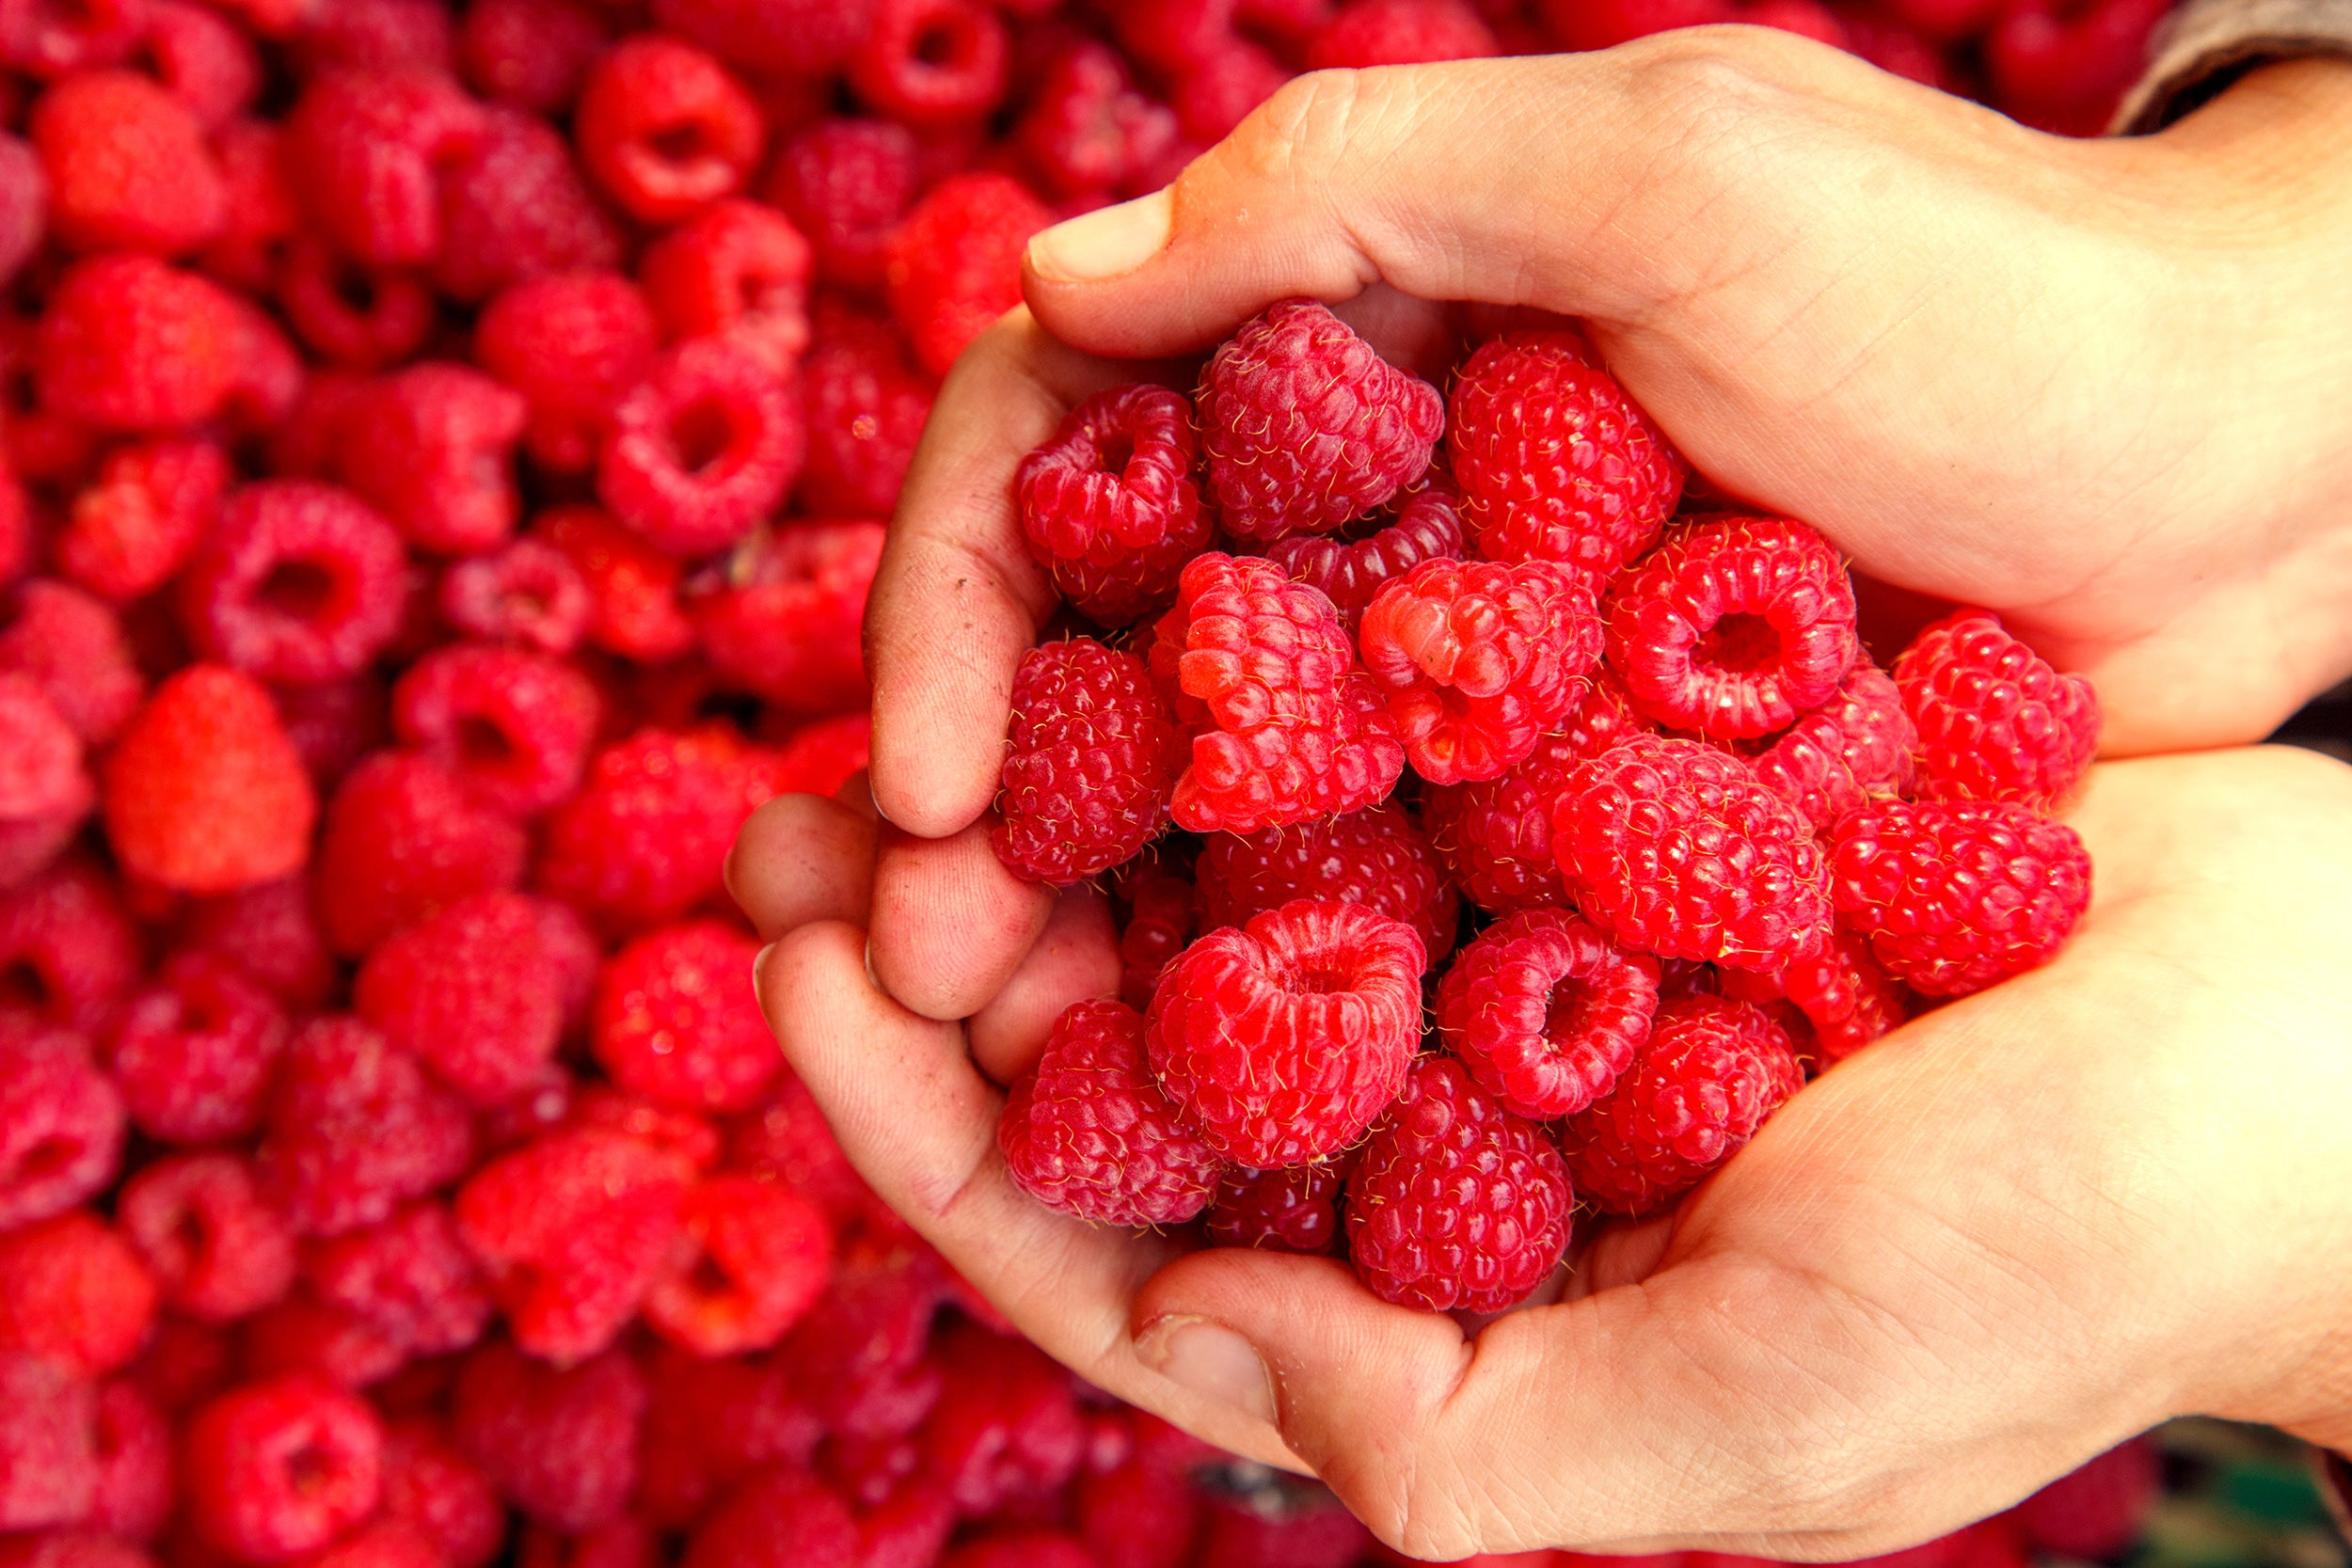 Raspberry Extract: Your Skin's New Best Friend